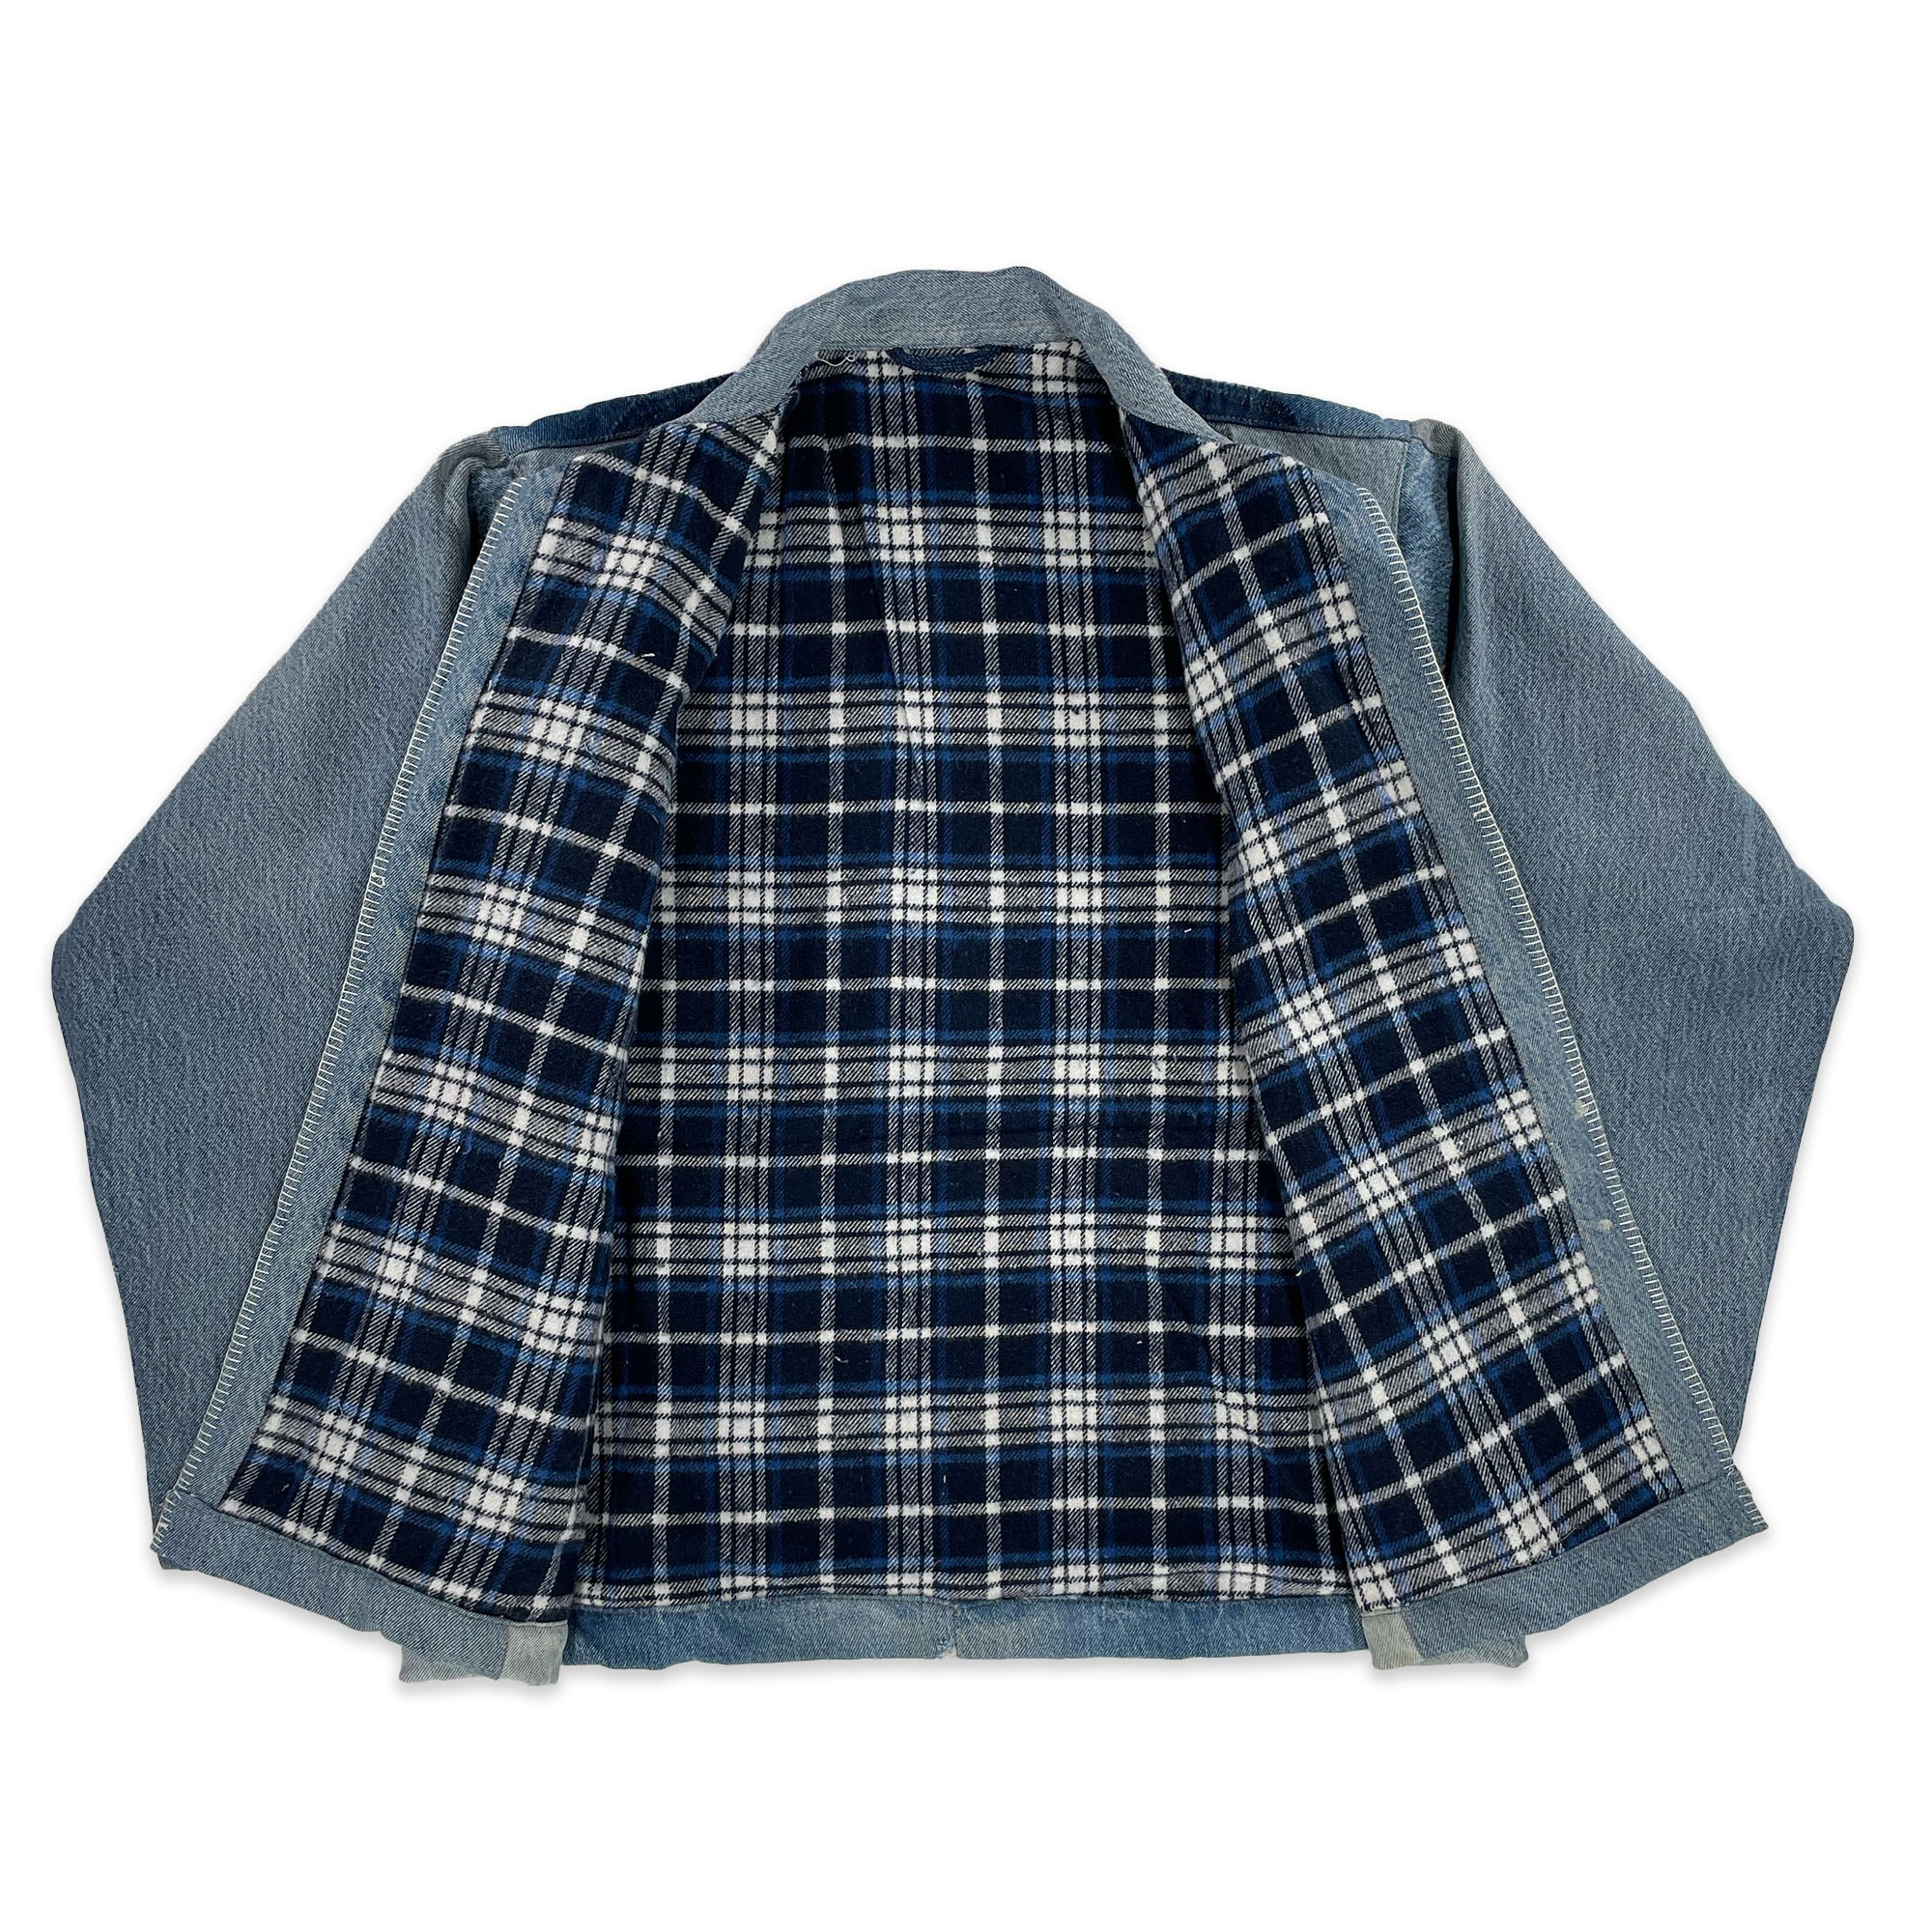 Chore Coat Made From Upcycled Work Jeans - Blanket Stitching - XL - 0